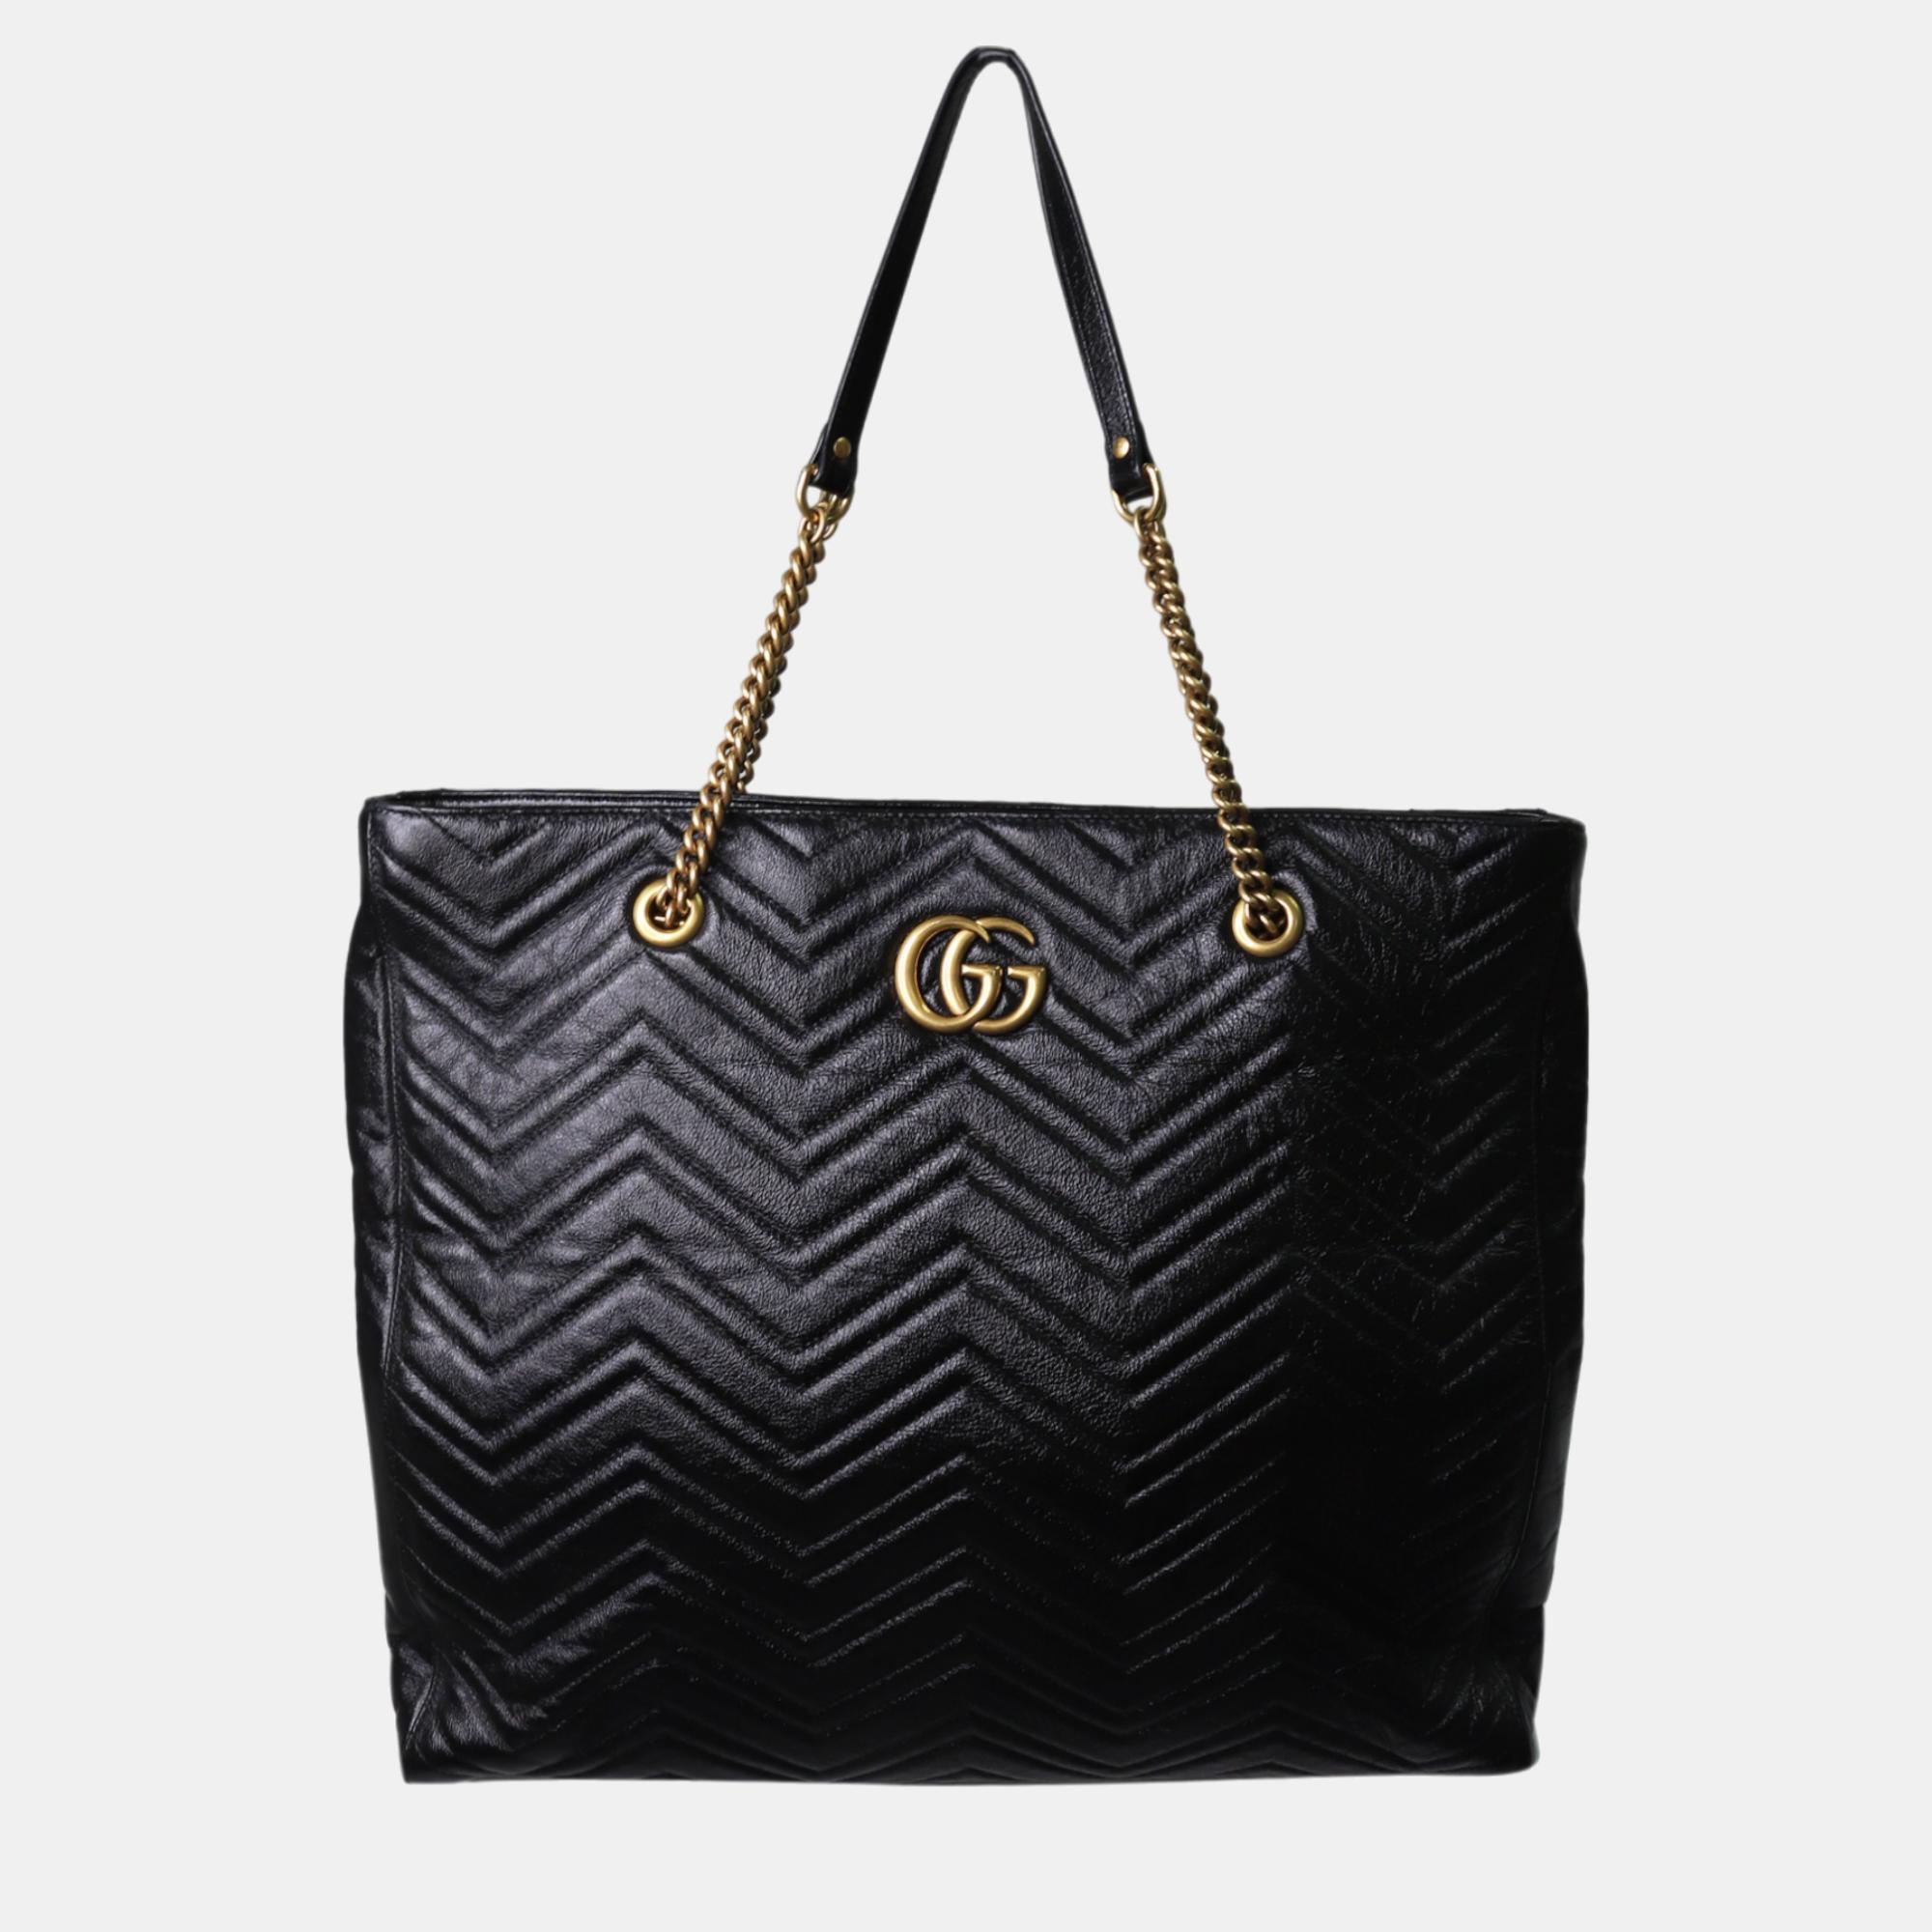 Gucci black leather gg marmont matelass&eacute; tote bag